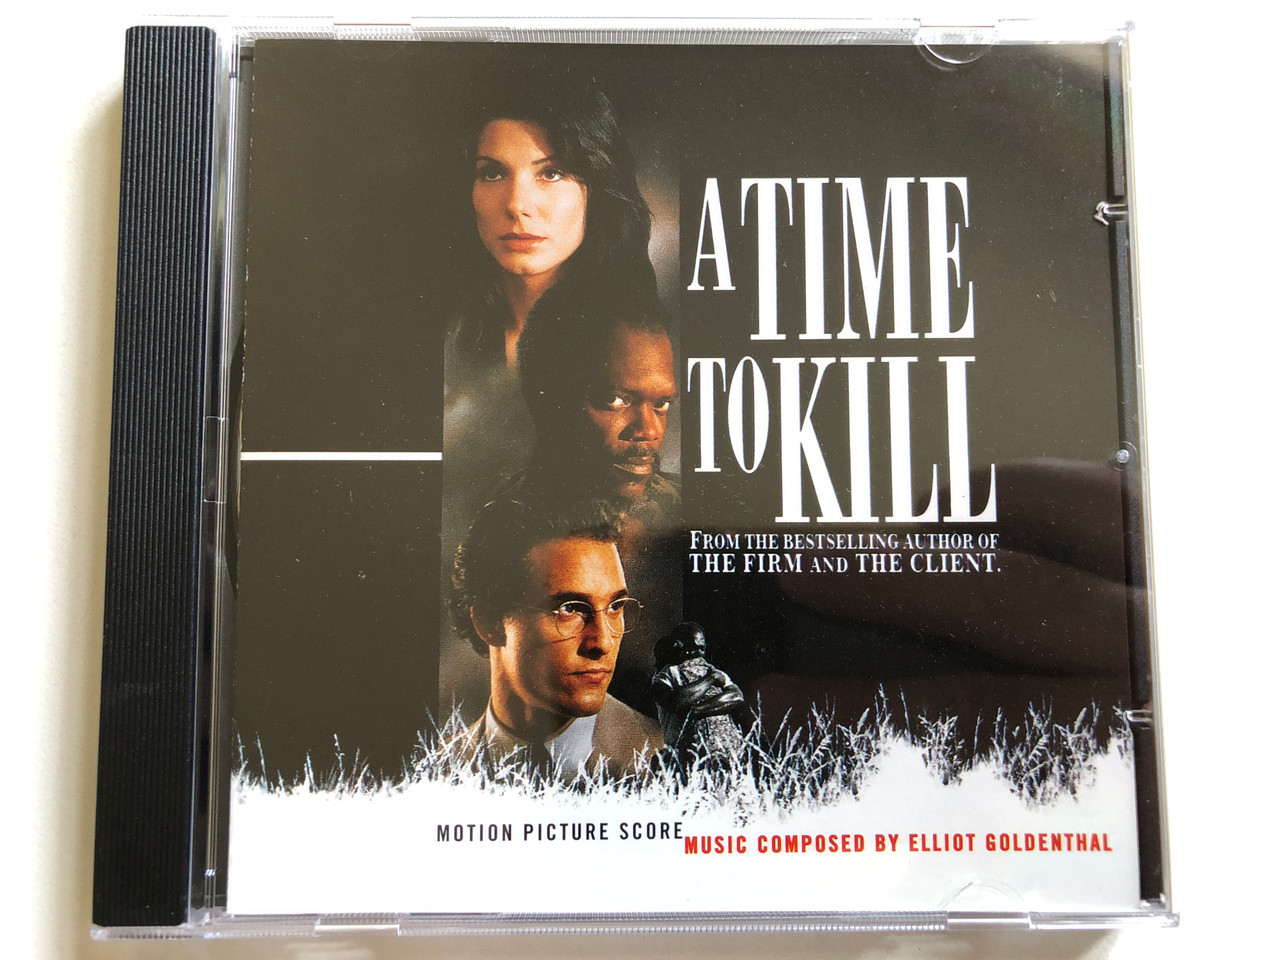 https://cdn10.bigcommerce.com/s-62bdpkt7pb/products/0/images/298377/A_Time_To_Kill_Motion_Picture_Score_-_From_The_Bestselling_Author_Of_The_Firm_And_The_Client_-_Music_Composed_By_Elliot_Goldenthal_Atlantic_Audio_CD_1996_7567-82959-2_1__00792.1693810221.1280.1280.JPG?c=2&_gl=1*1lrkipk*_ga*MjA2NTIxMjE2MC4xNTkwNTEyNTMy*_ga_WS2VZYPC6G*MTY5MzgwNzIzNy4xMDU2LjEuMTY5MzgwOTc1OC40Ni4wLjA.